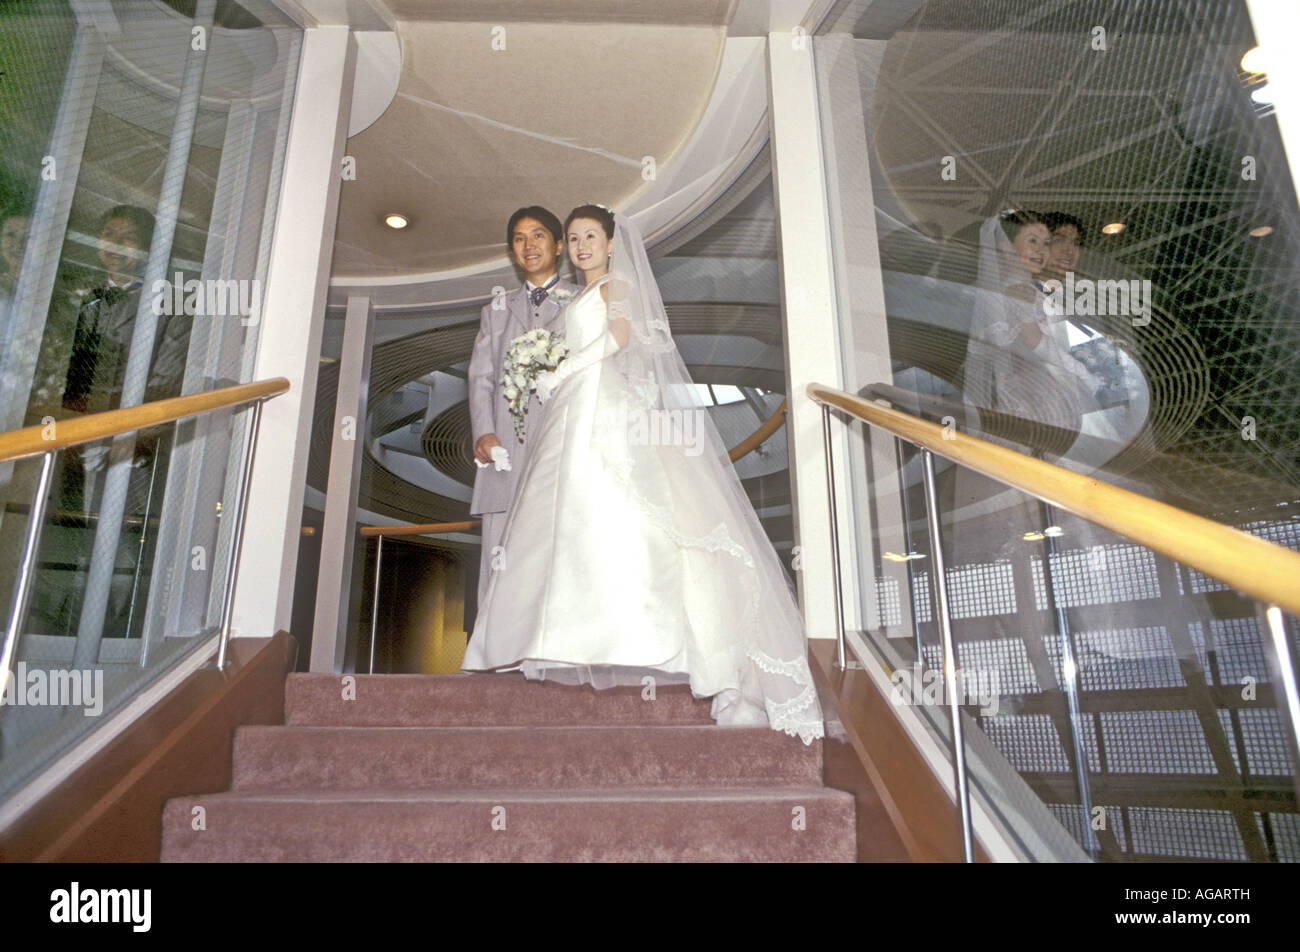 A Japanese wedding couple in Catholic church within a Hotel wearing